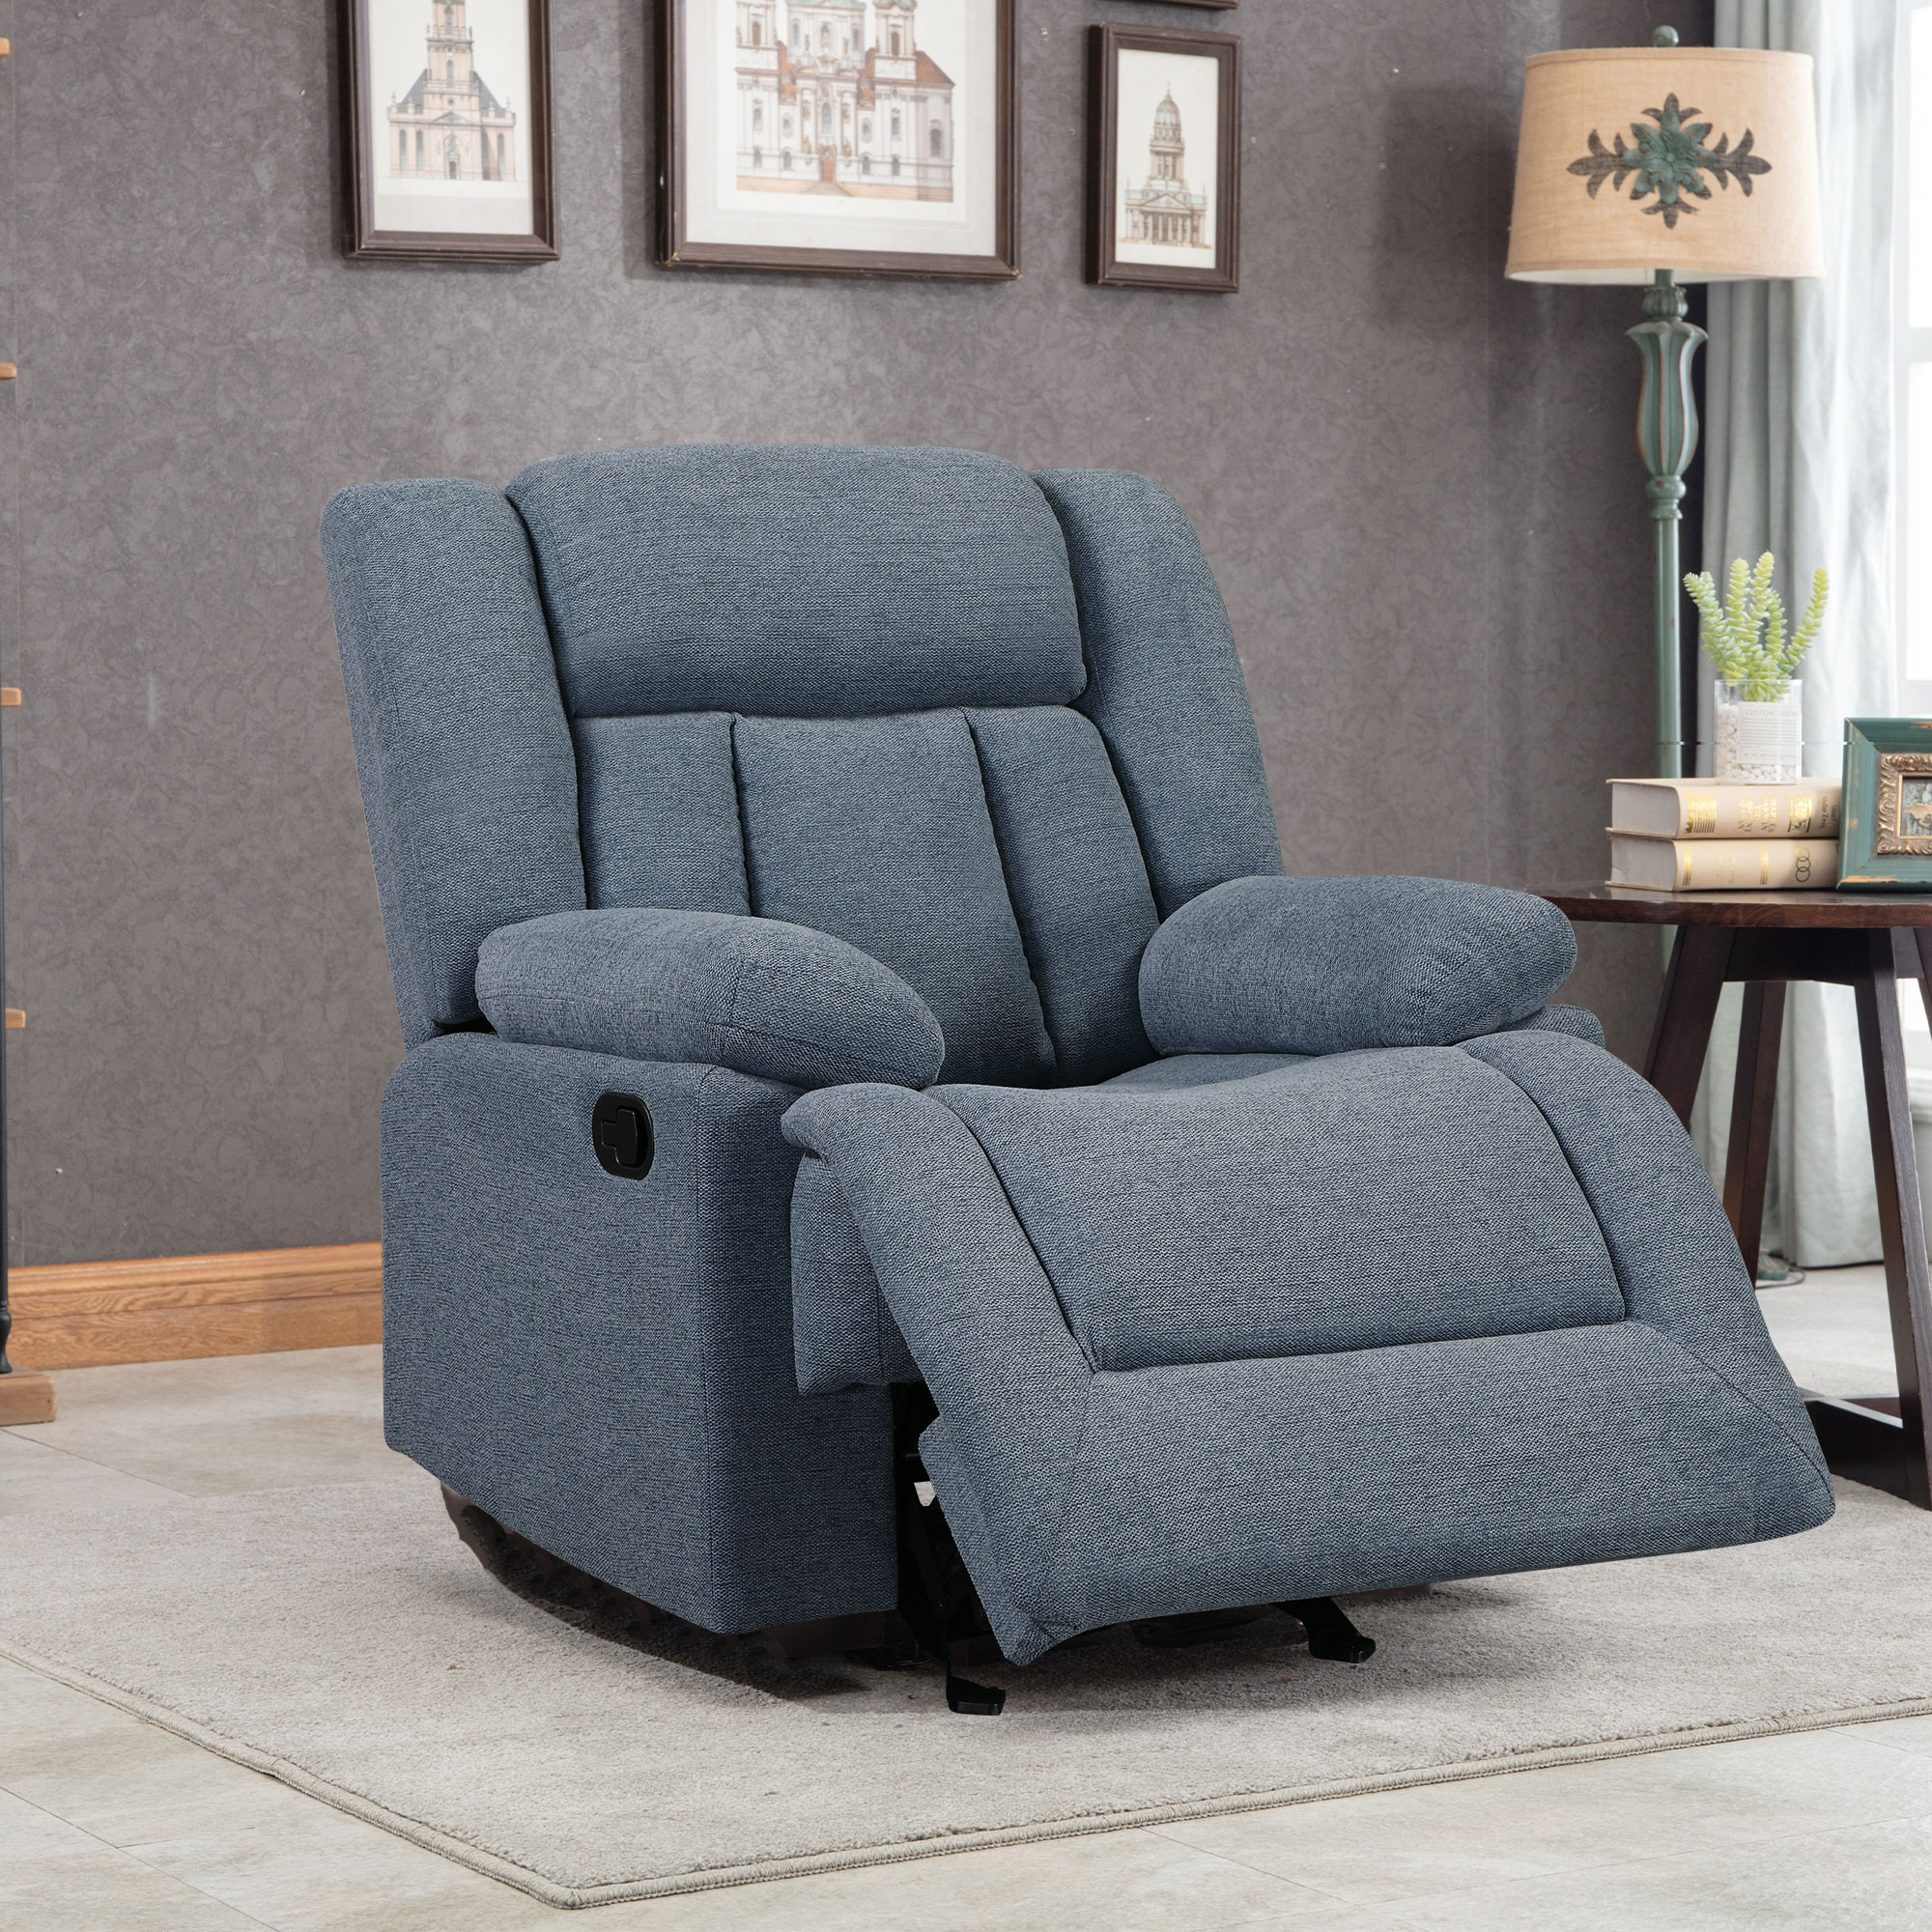 Welike Blue Fabric Recliner Chair Adjustable Home Theater Single Recliner Thick Seat and Backrest, Rocking Sofa for Living Room-Boyel Living